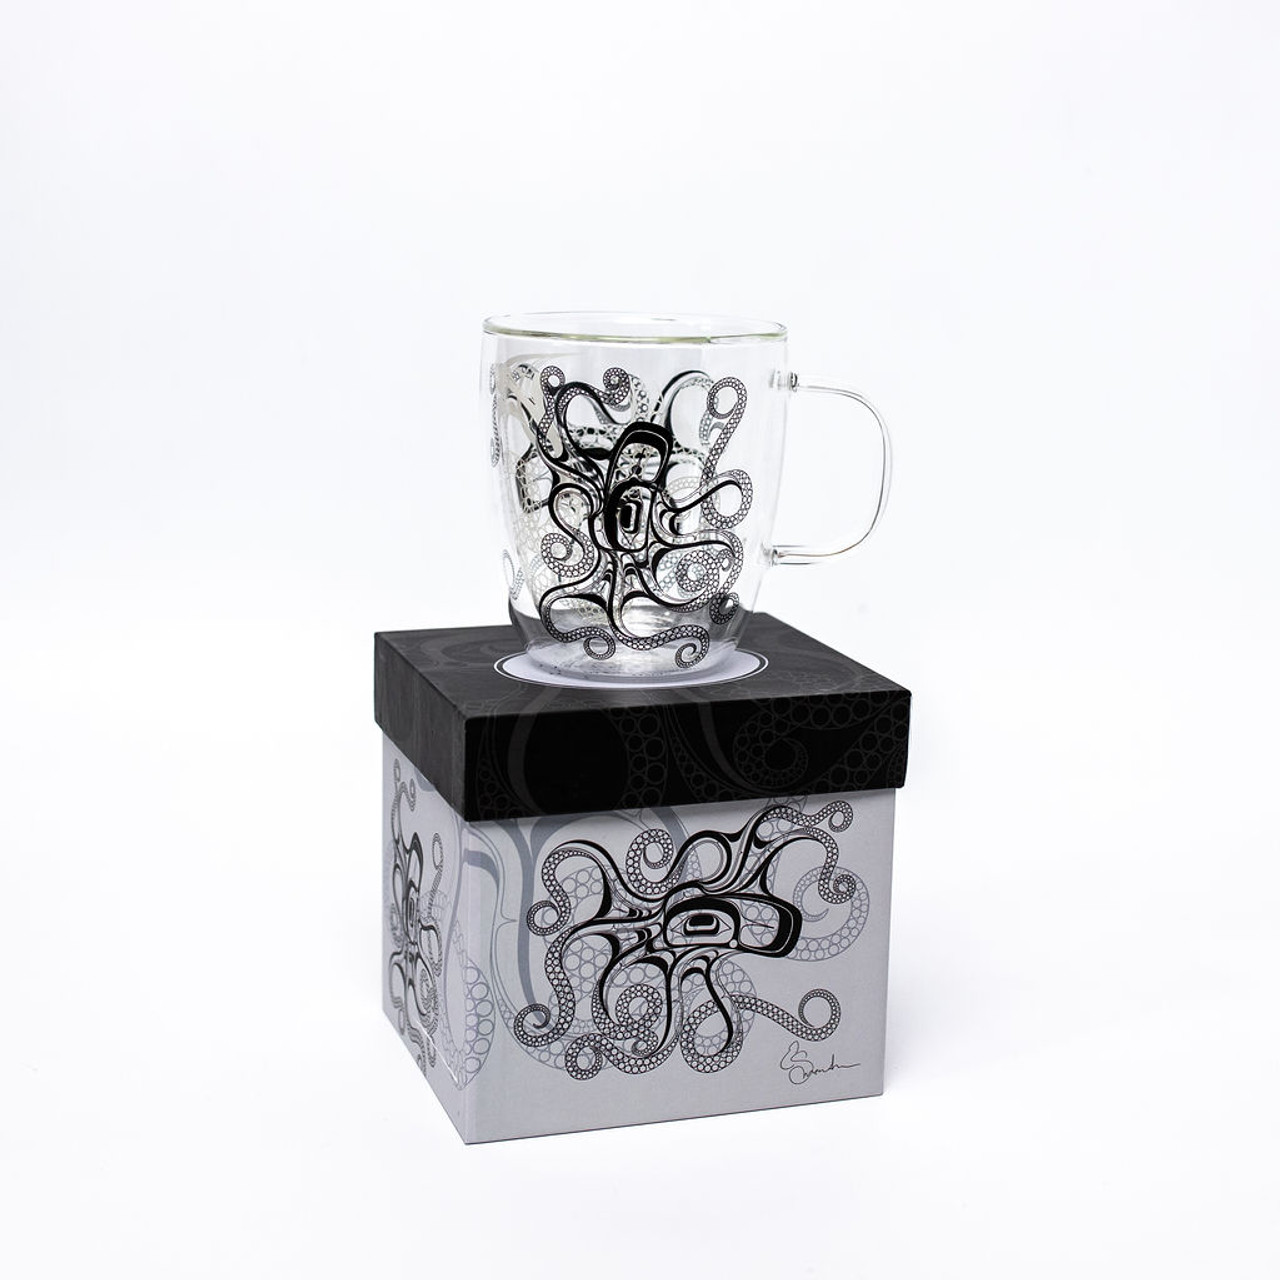 Doubled Walled Glass Mugs by Native Northwest